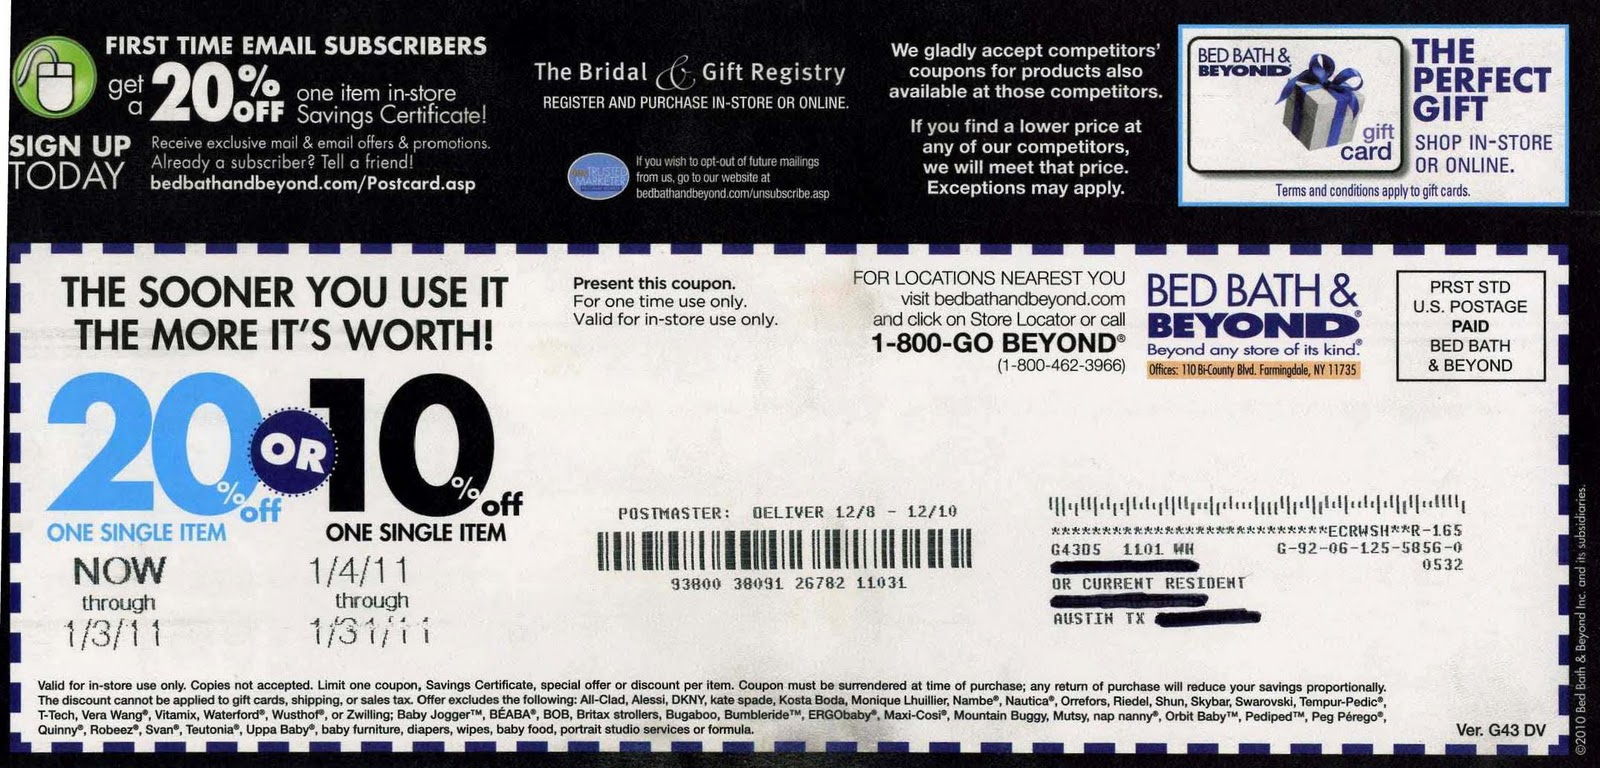 Bed Bath And Beyond Coupons And Printable Coupons: Bed Bath And - Free Printable Bed Bath And Beyond 20 Off Coupon